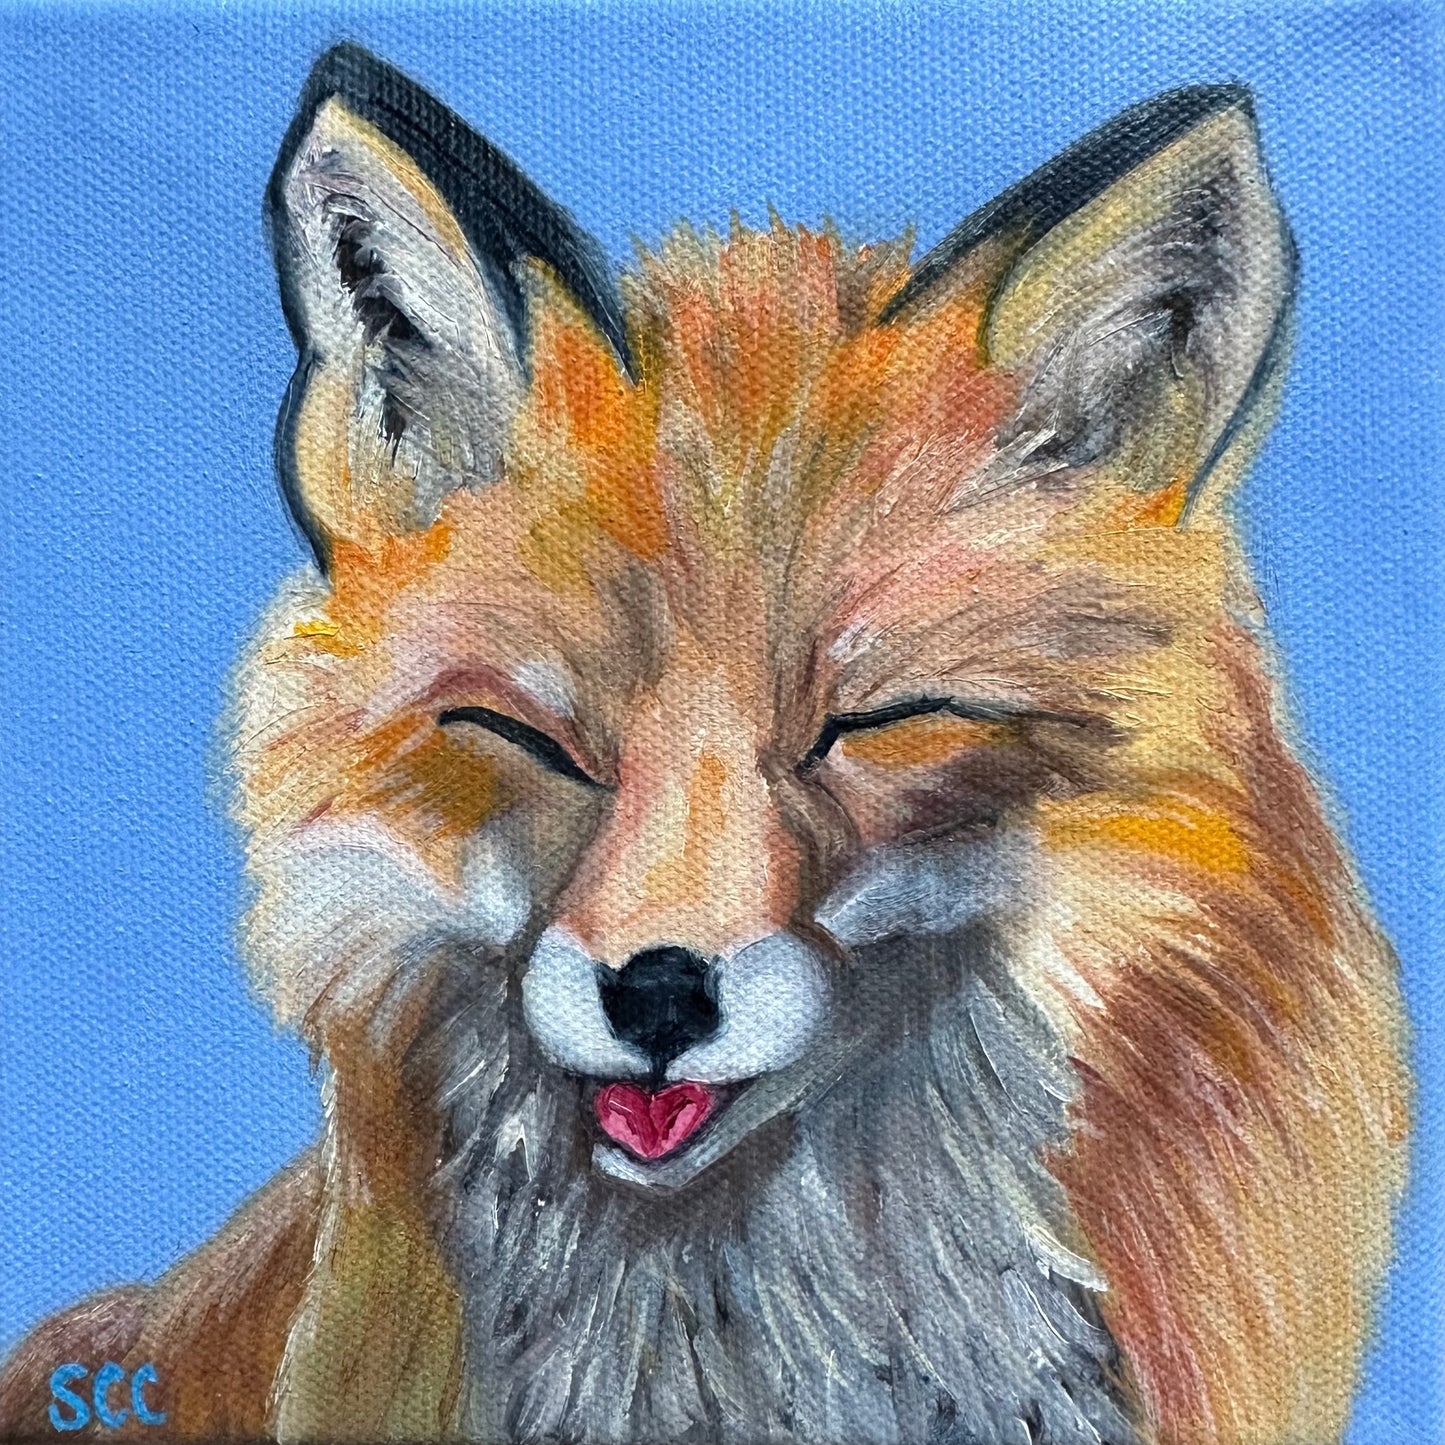 Tongue Out Tuesday |6x6| Oil